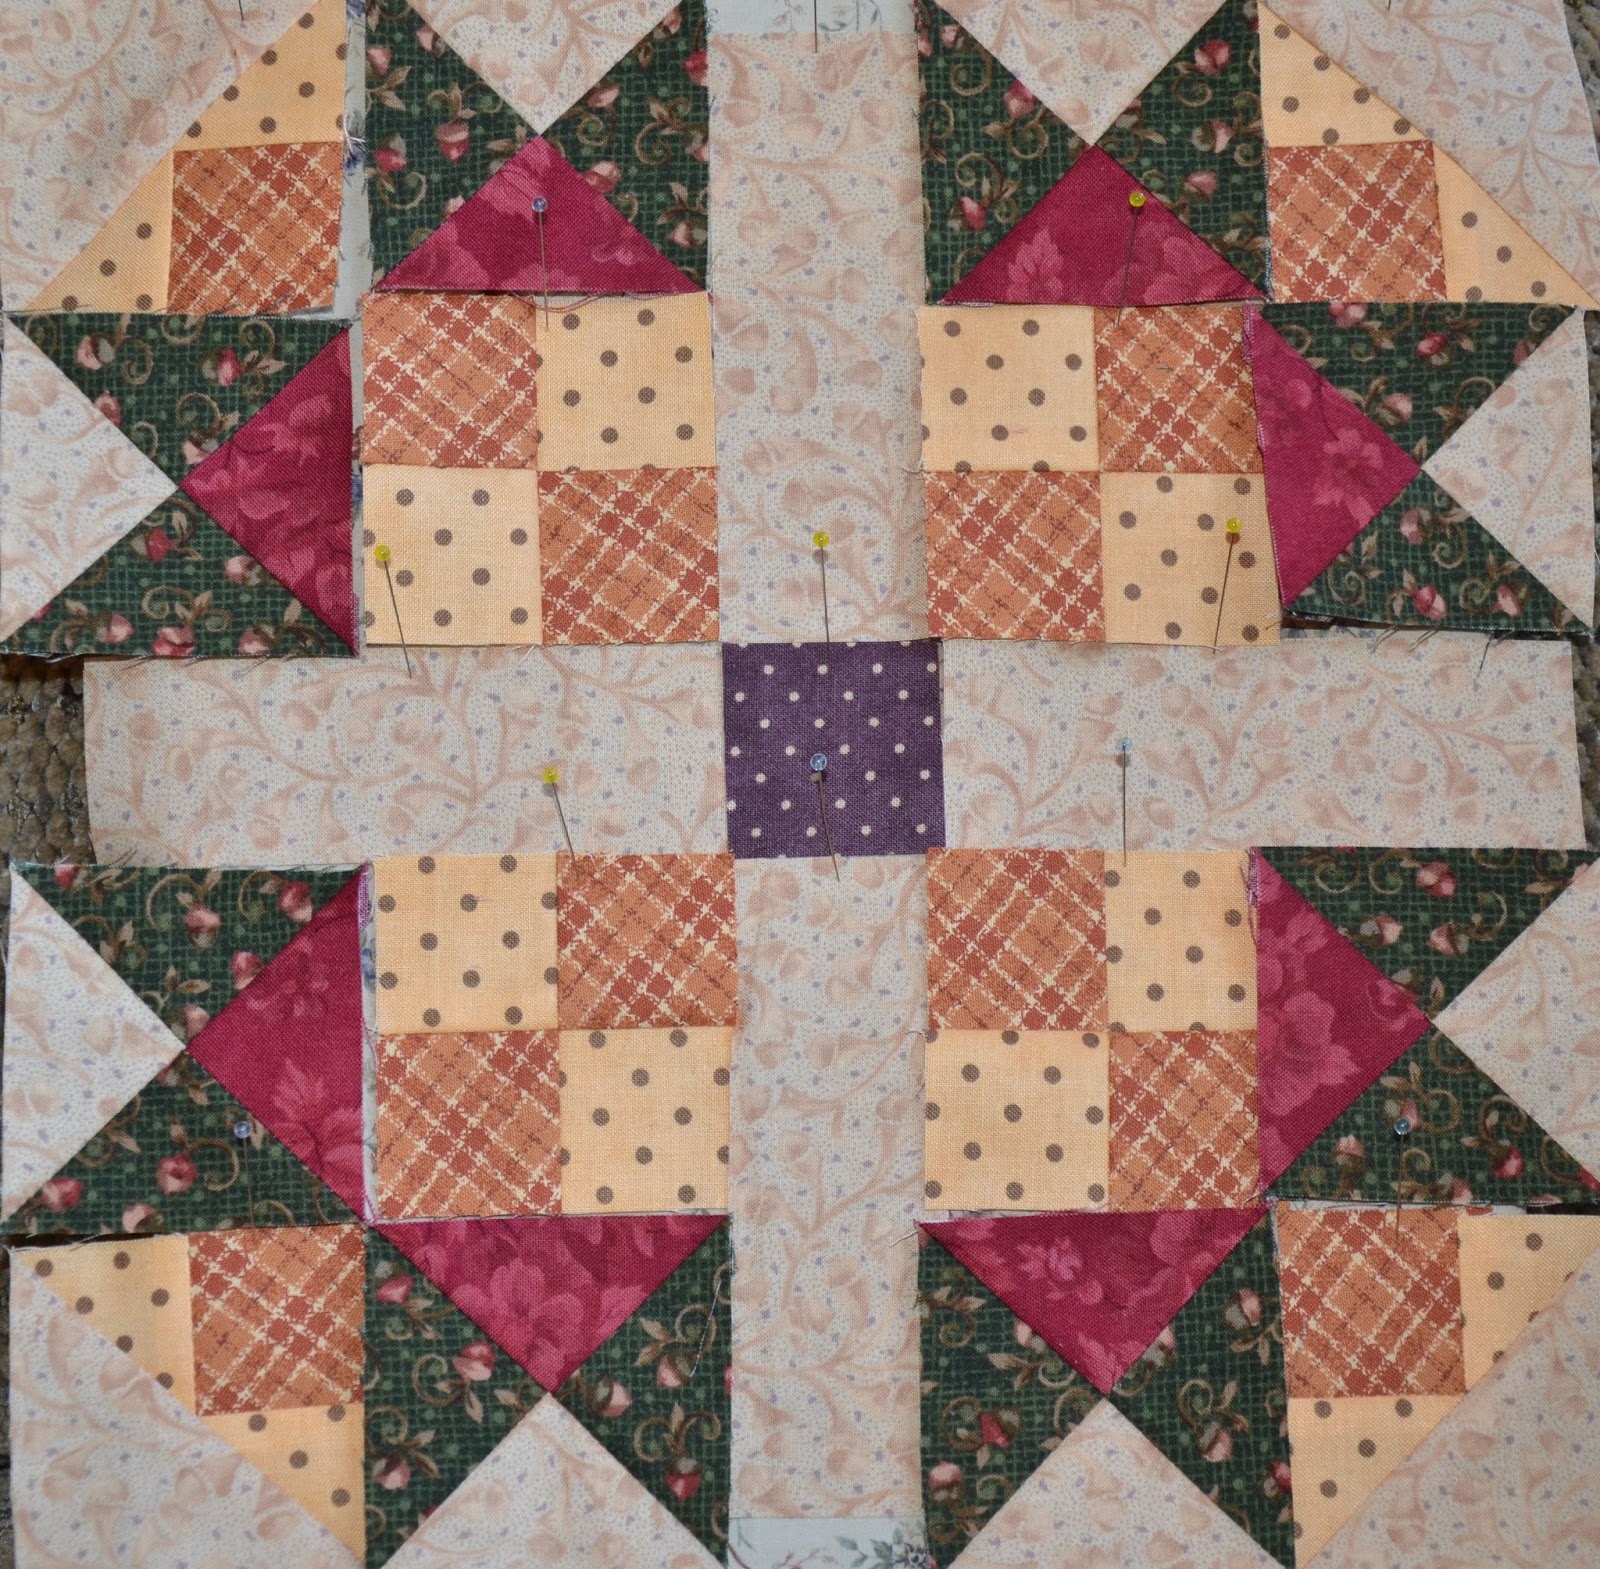 Sew'n Wild Oaks Quilting Blog: More Quilting Components